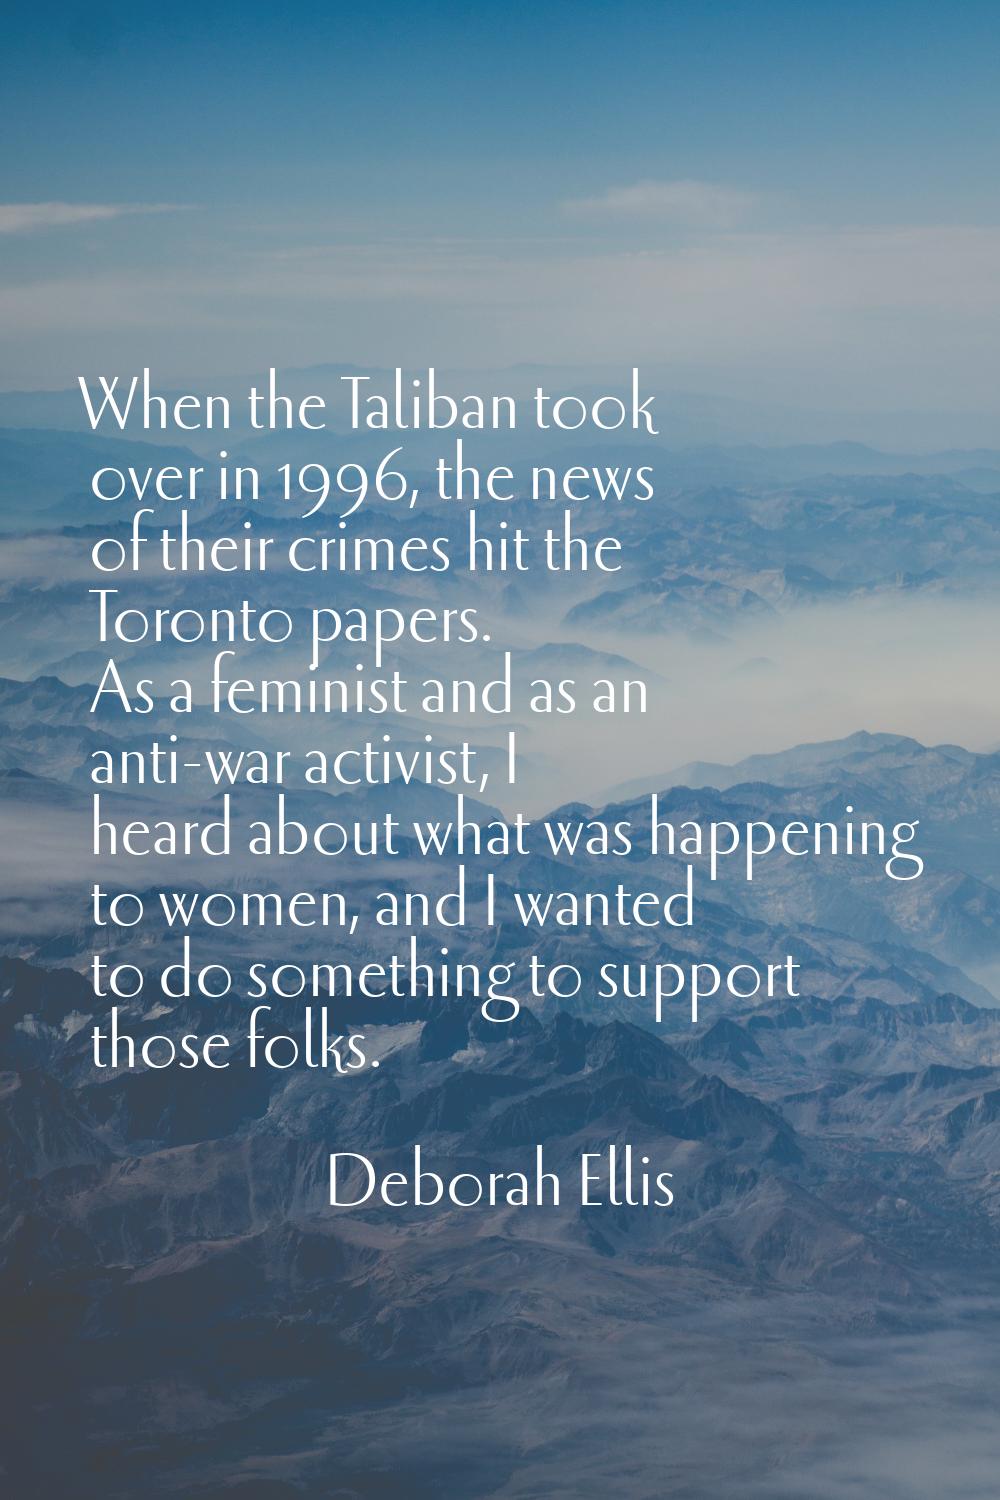 When the Taliban took over in 1996, the news of their crimes hit the Toronto papers. As a feminist 